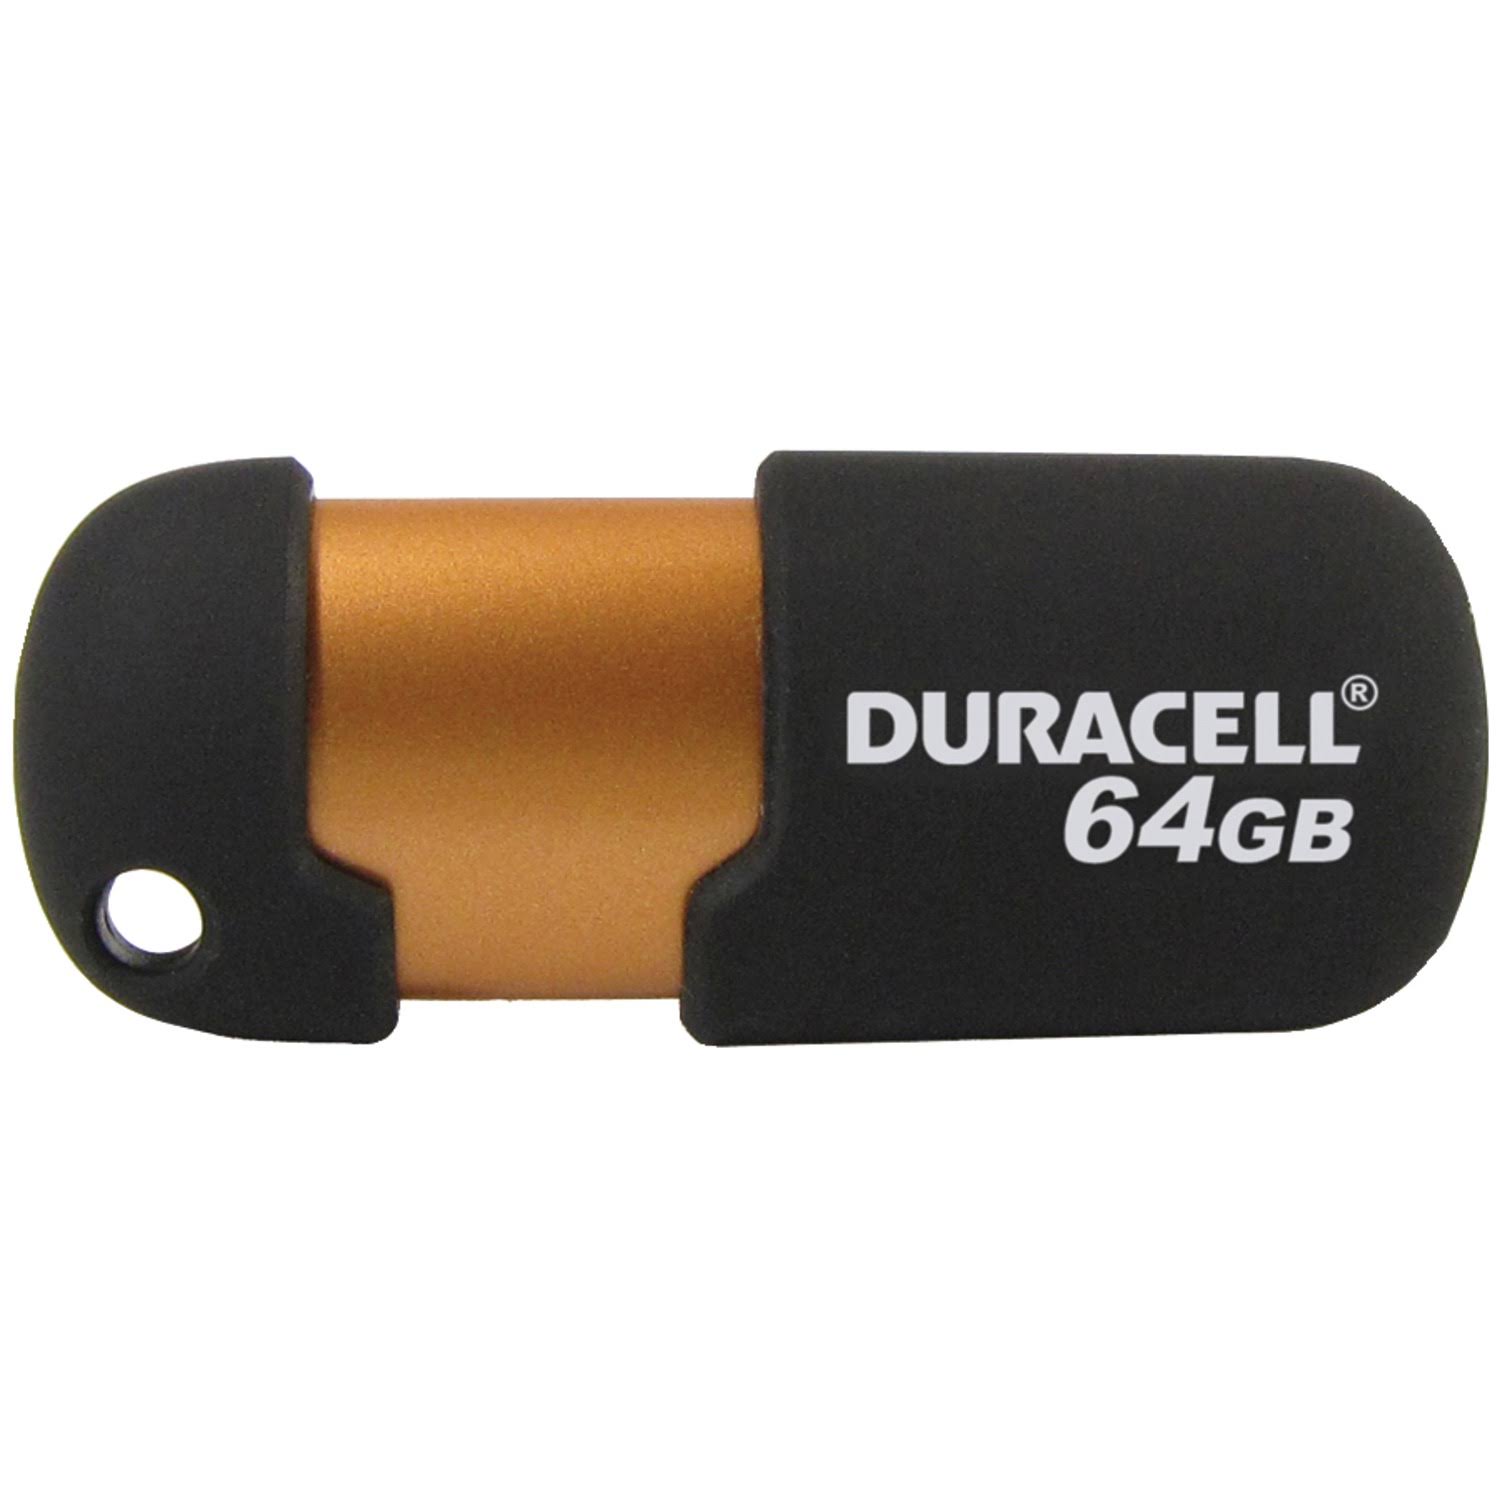 Duracell Capless USB Flash Drive - Copper and Black, 64gb